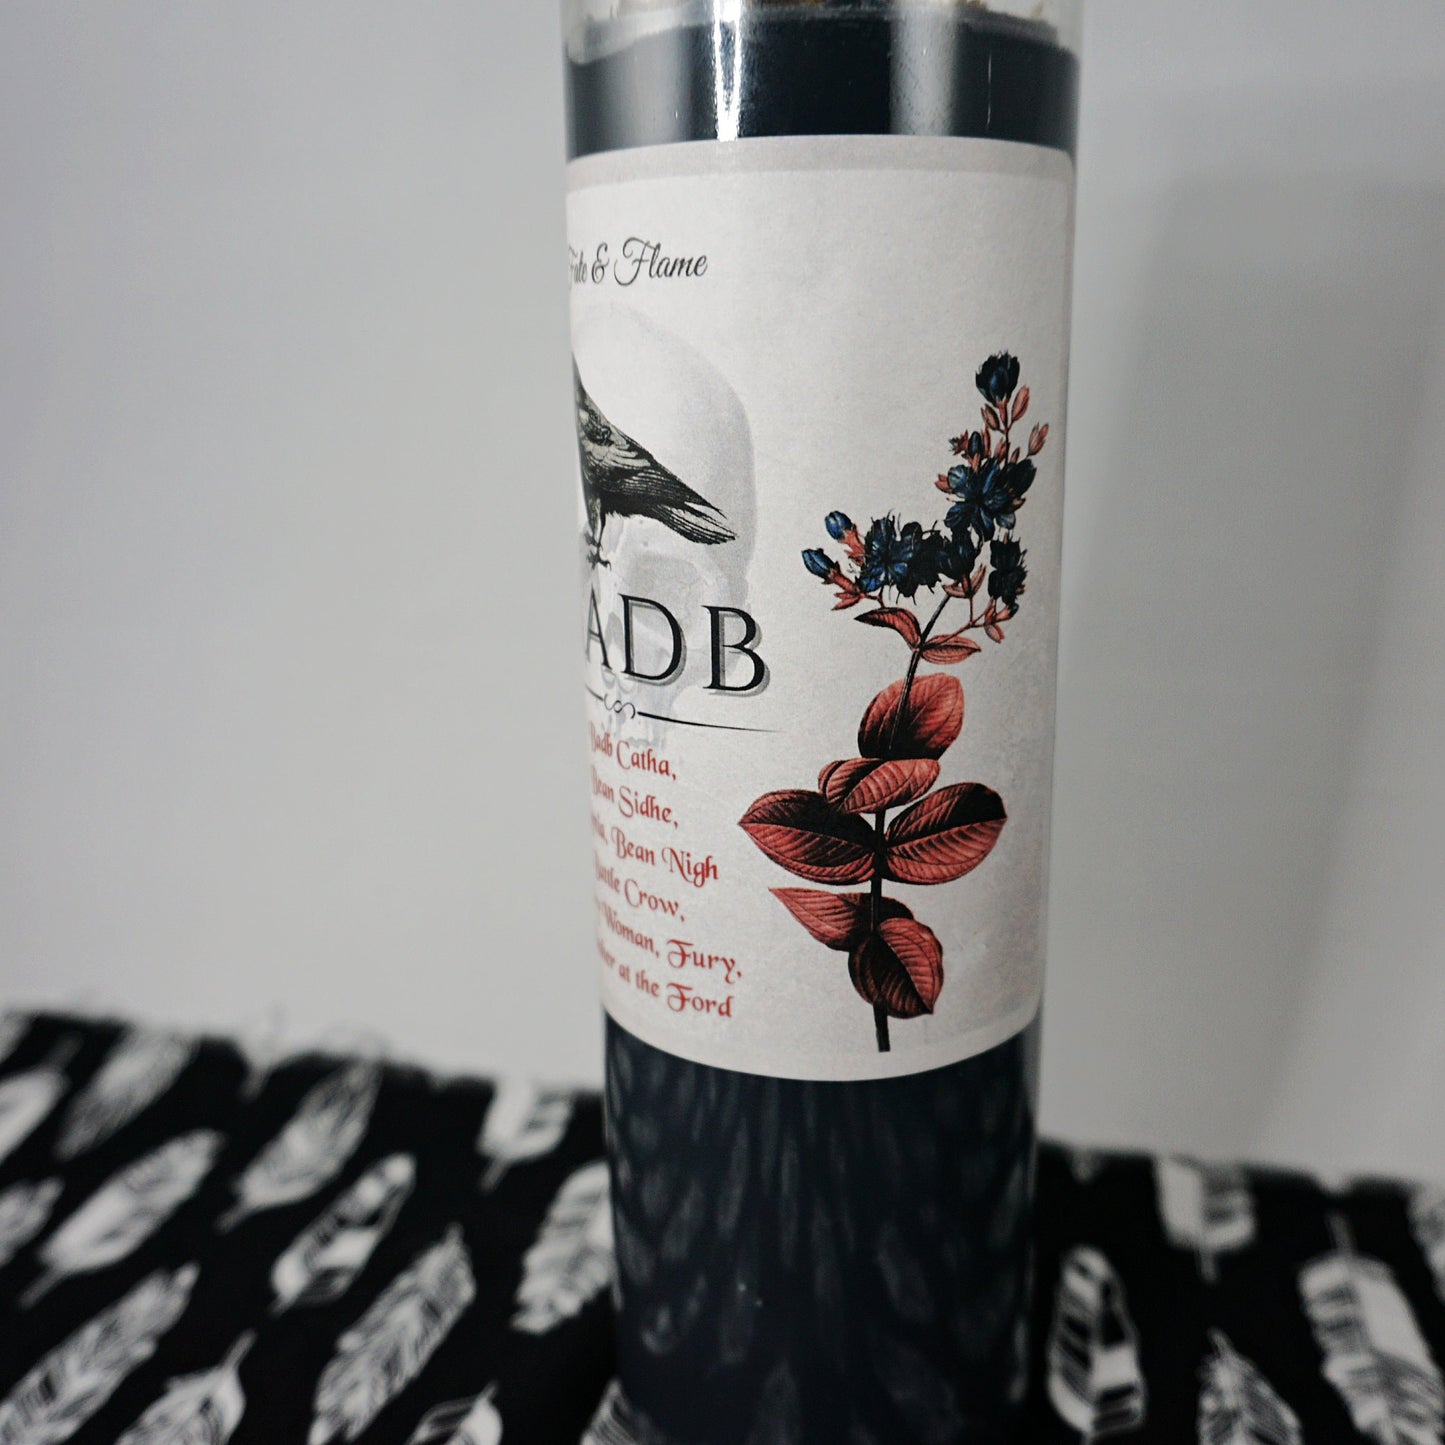 BADB Ritual Candle, Invocation Candle, Dark Goddess Offering, Death, Prophecy, Protection, Crone Work